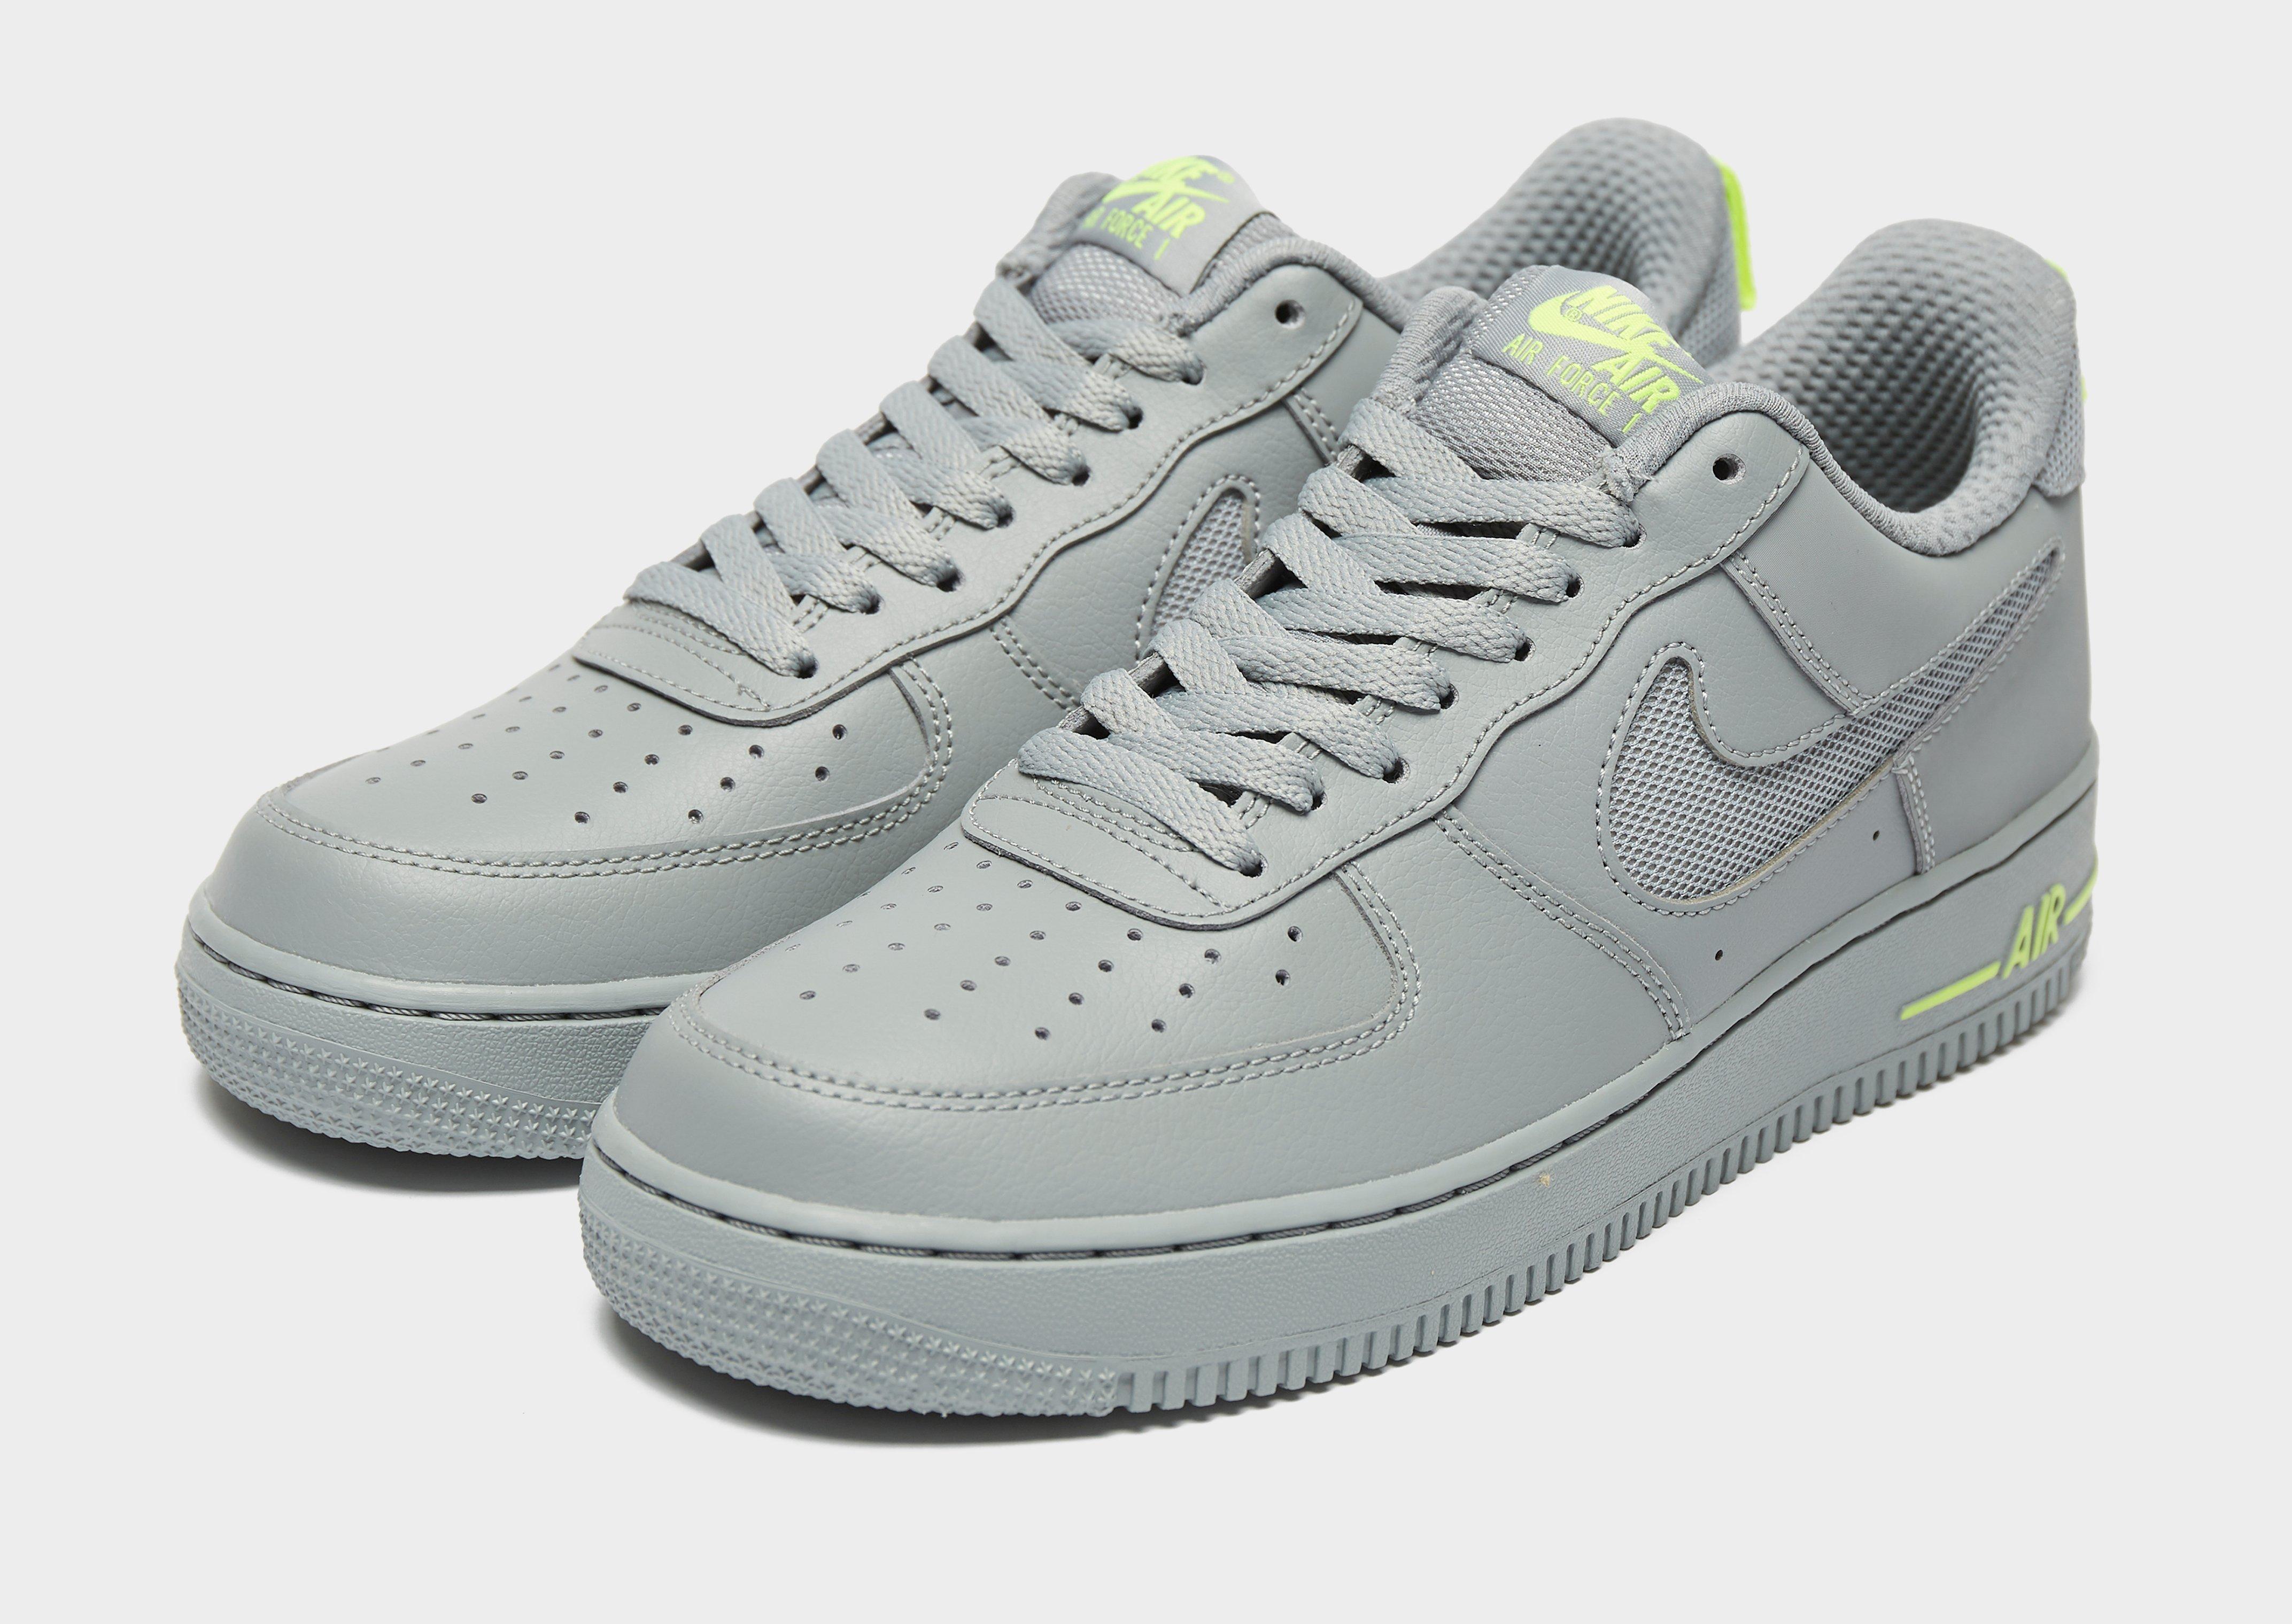 air force 1 jd exclusive